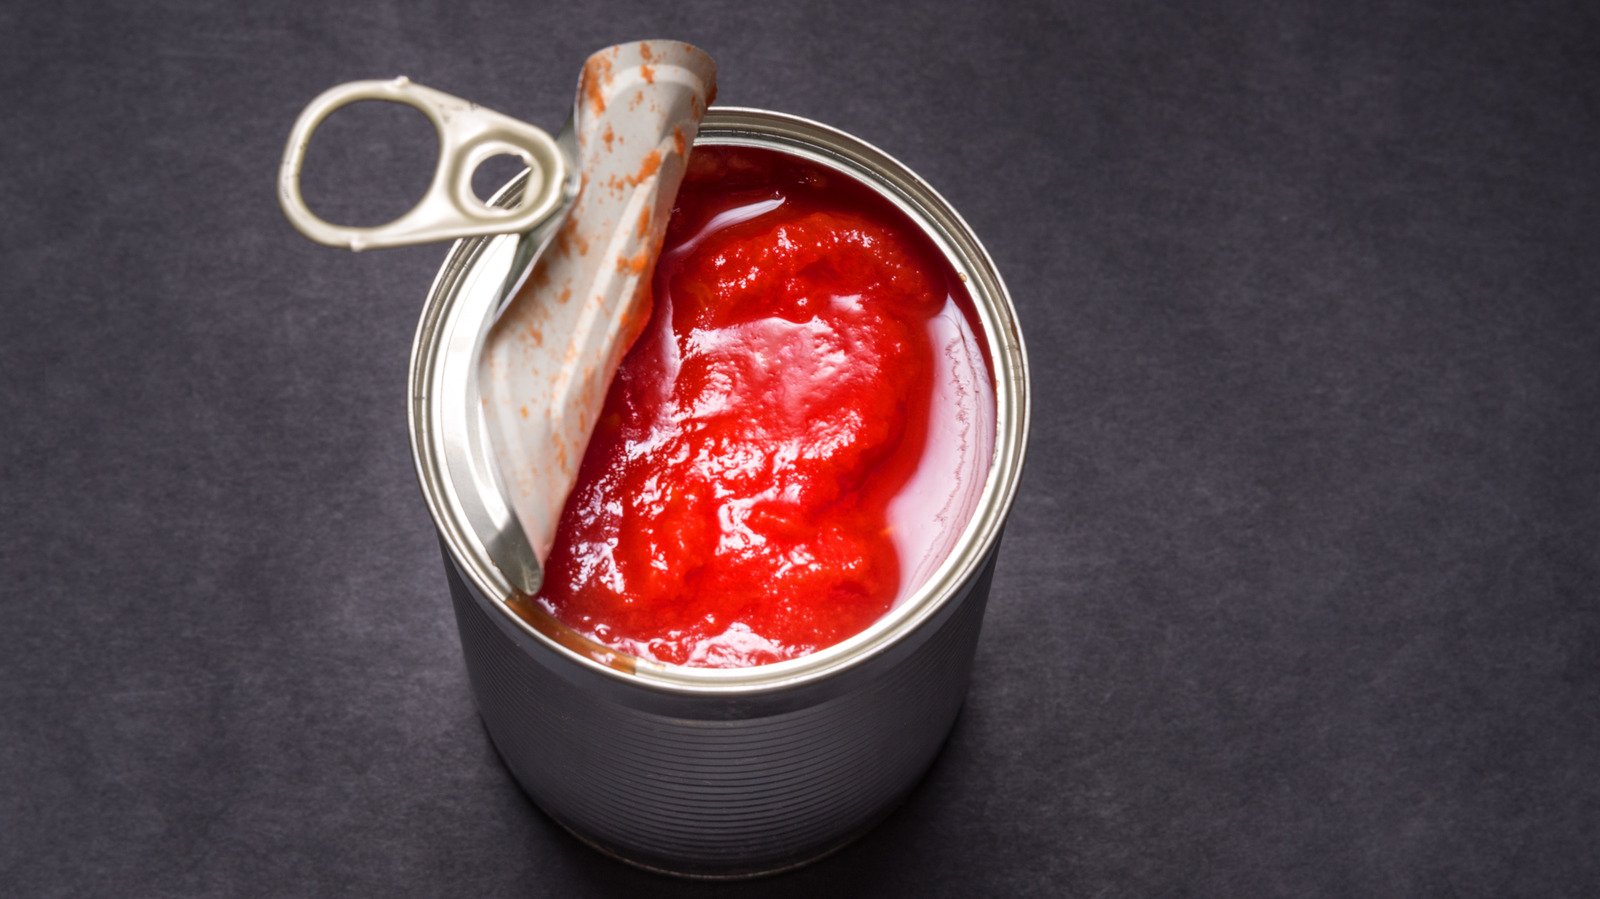 For That Fresh Tomato Flavor, Look For This Type Of Canned Tomato